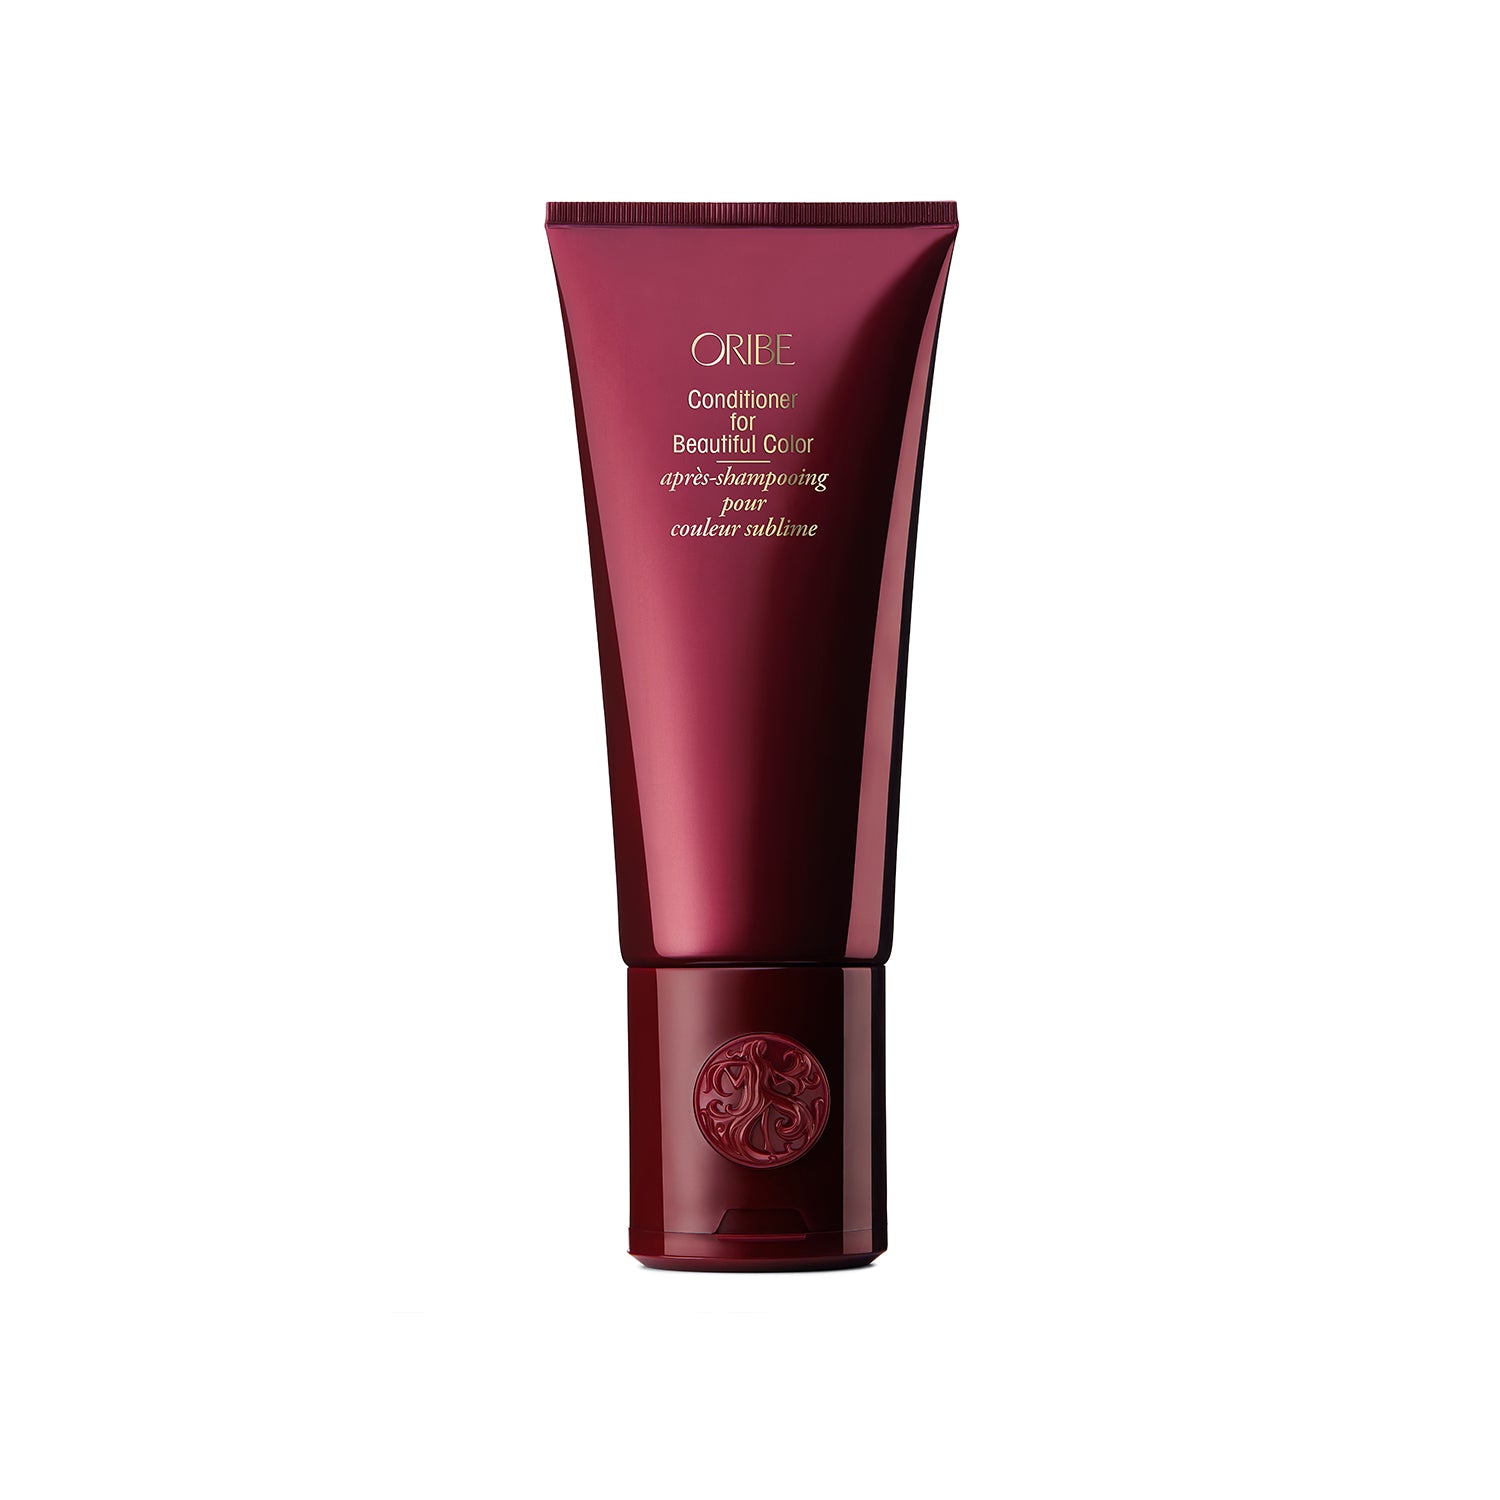 ORIBE - Conditioner for sublime color